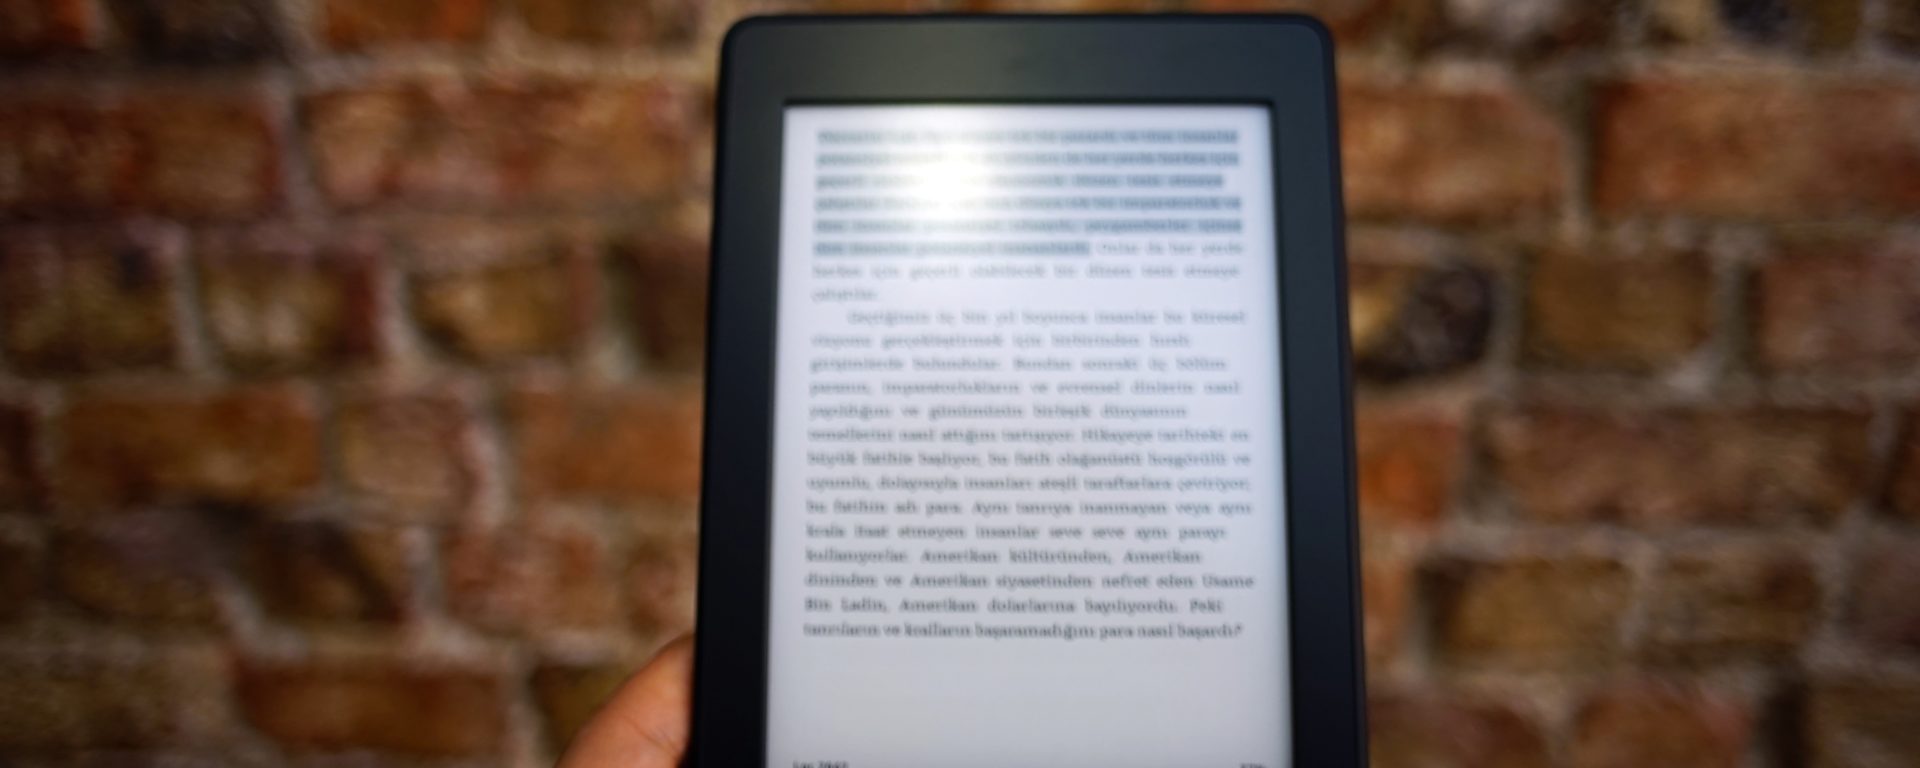 download kindle for pc 1.17